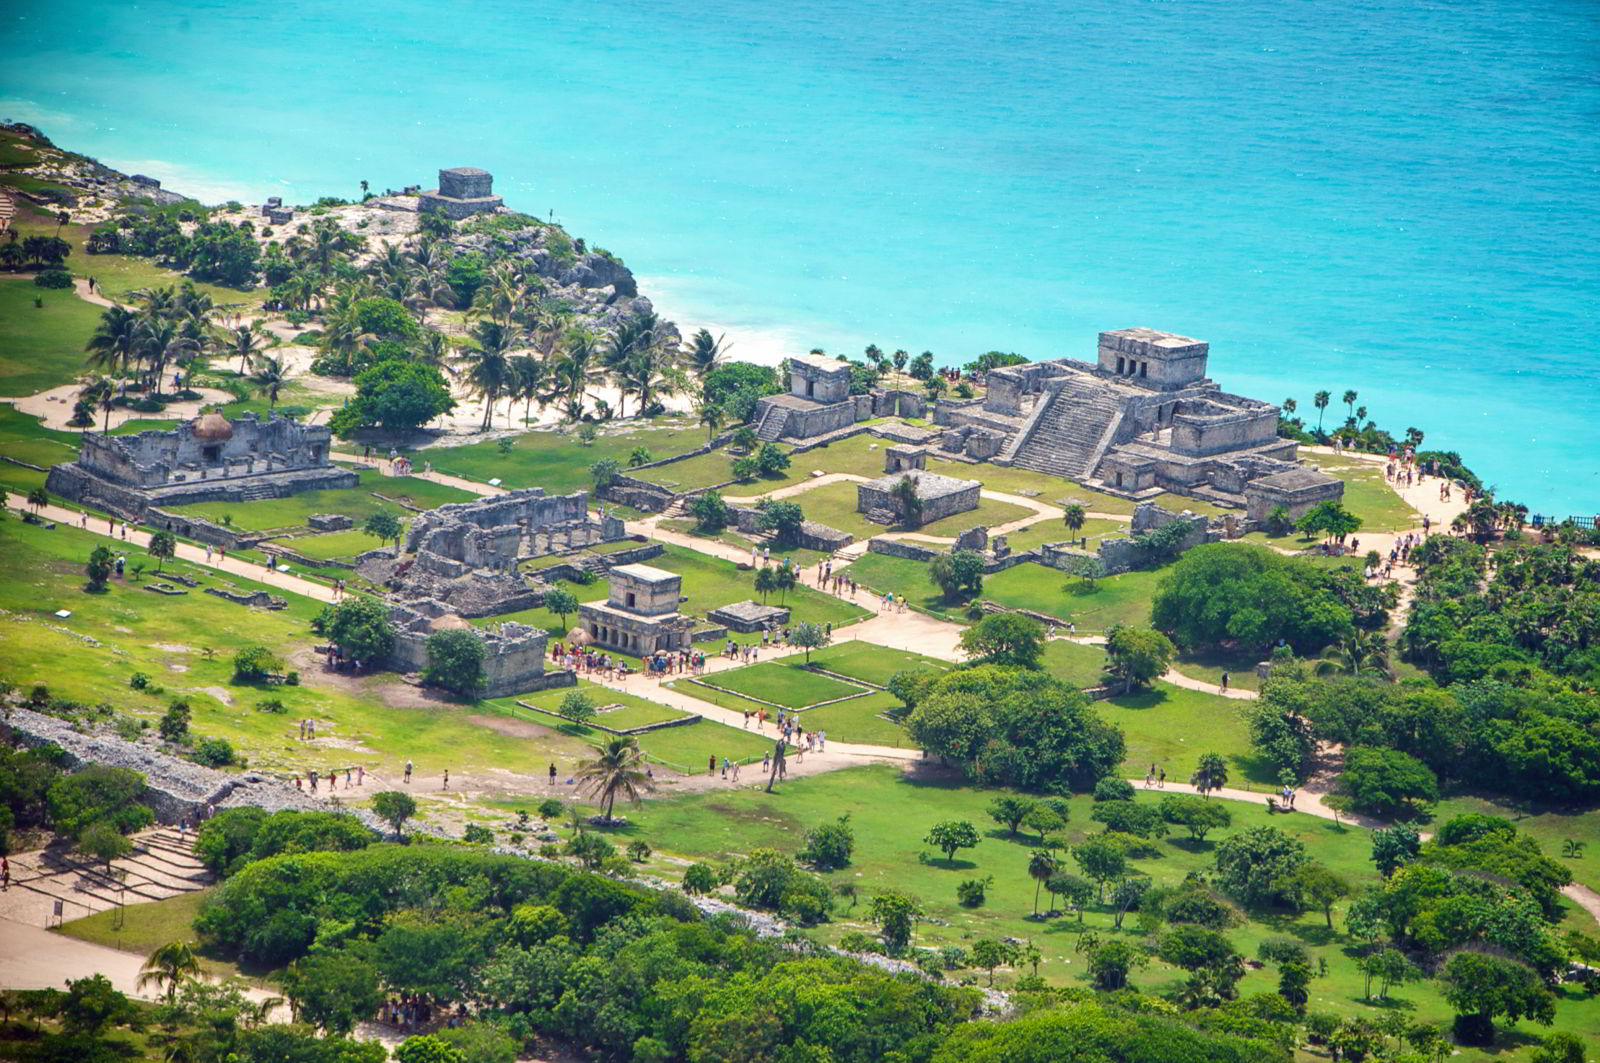 An image of the Tulum Ruins courtesy of Mexico Tourism